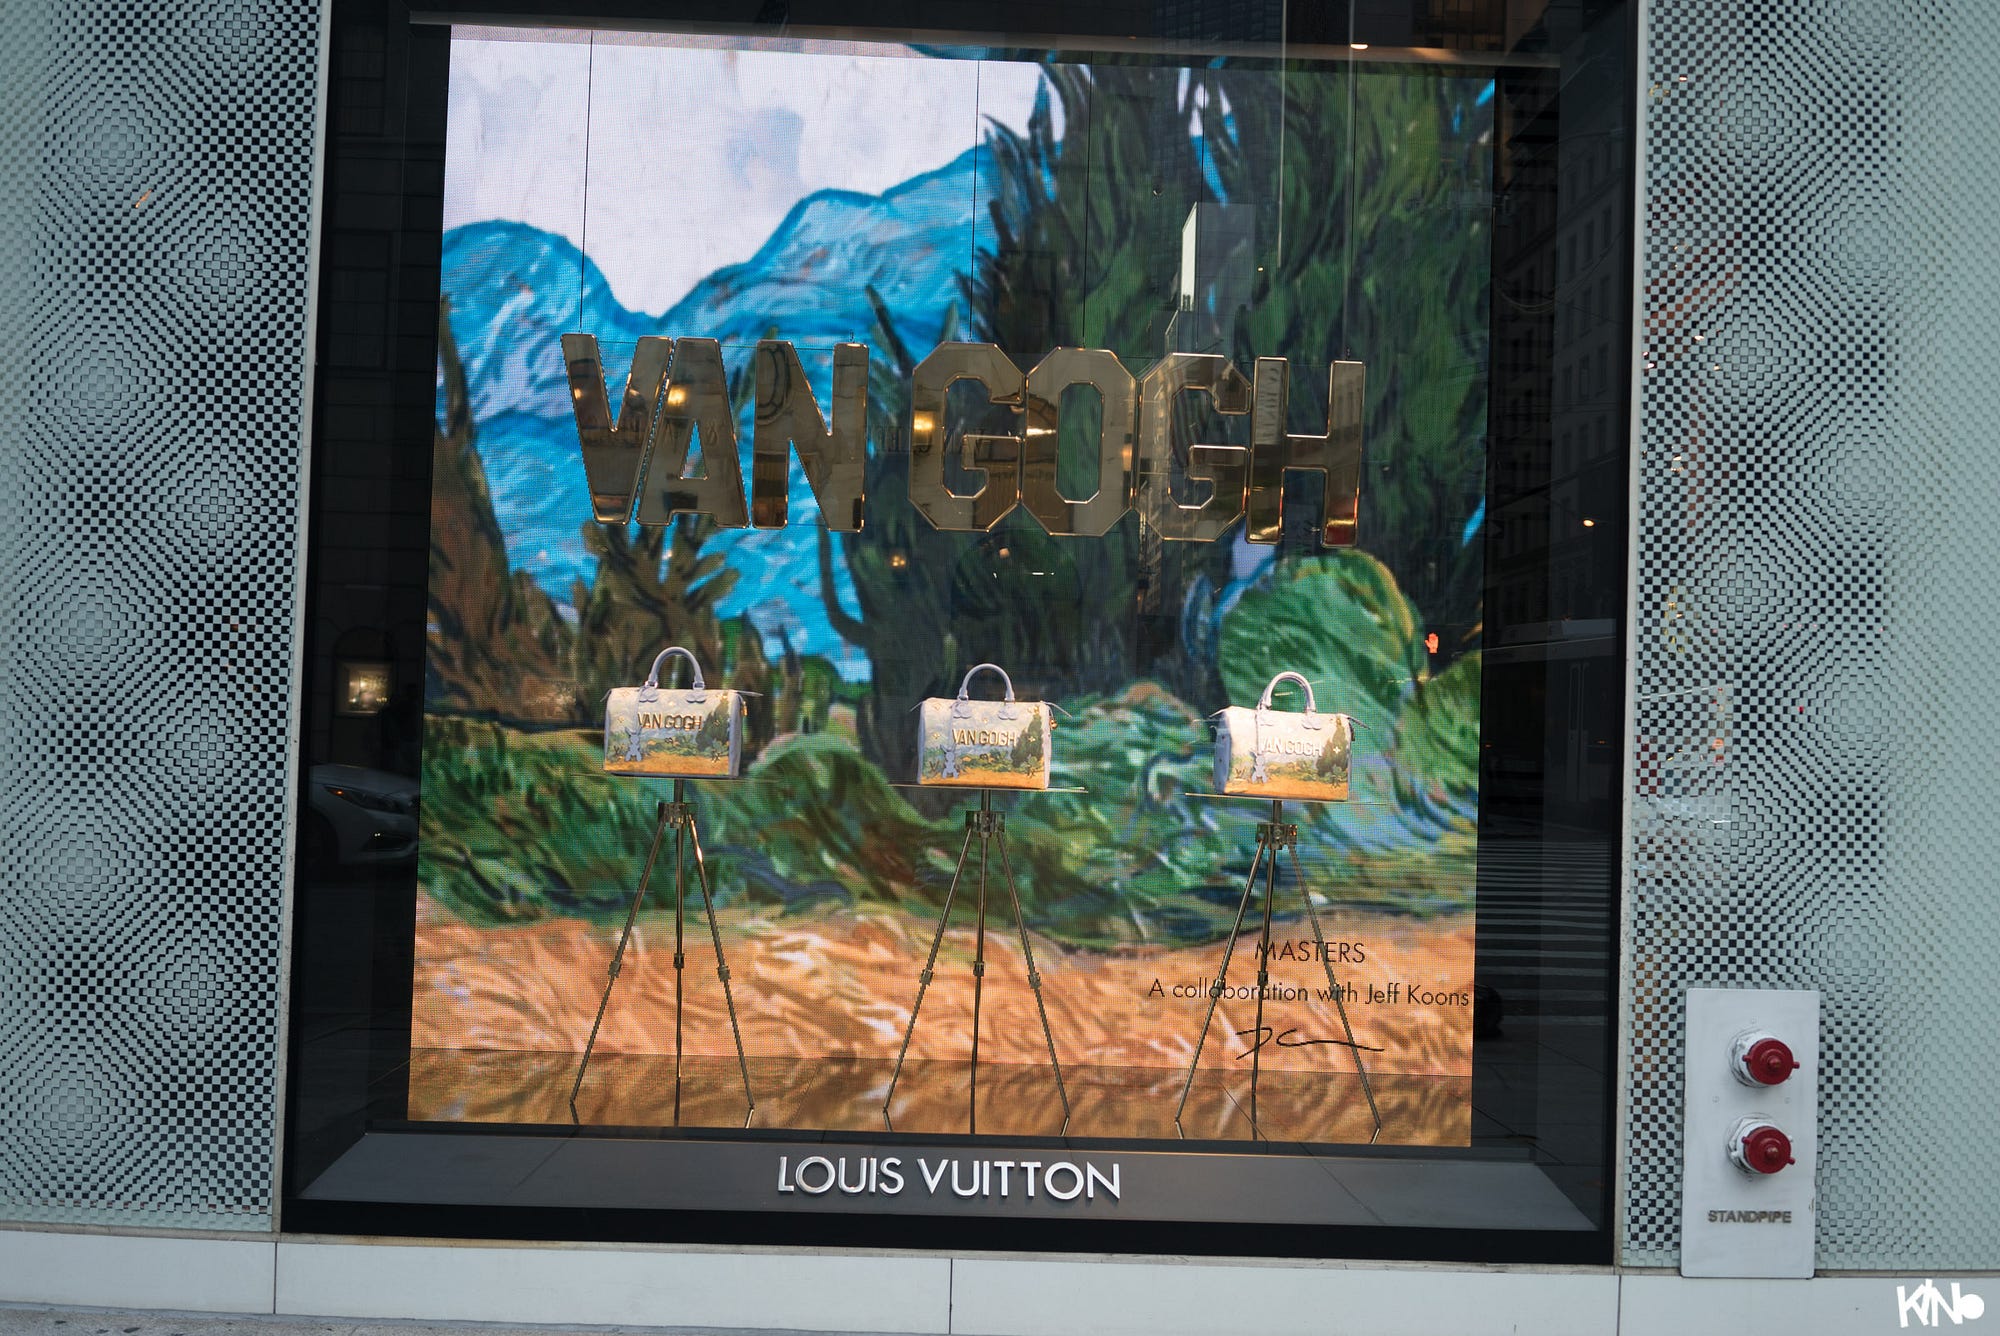 Louis Vuitton and Jeff Koons collaborate on Masters wave two - The